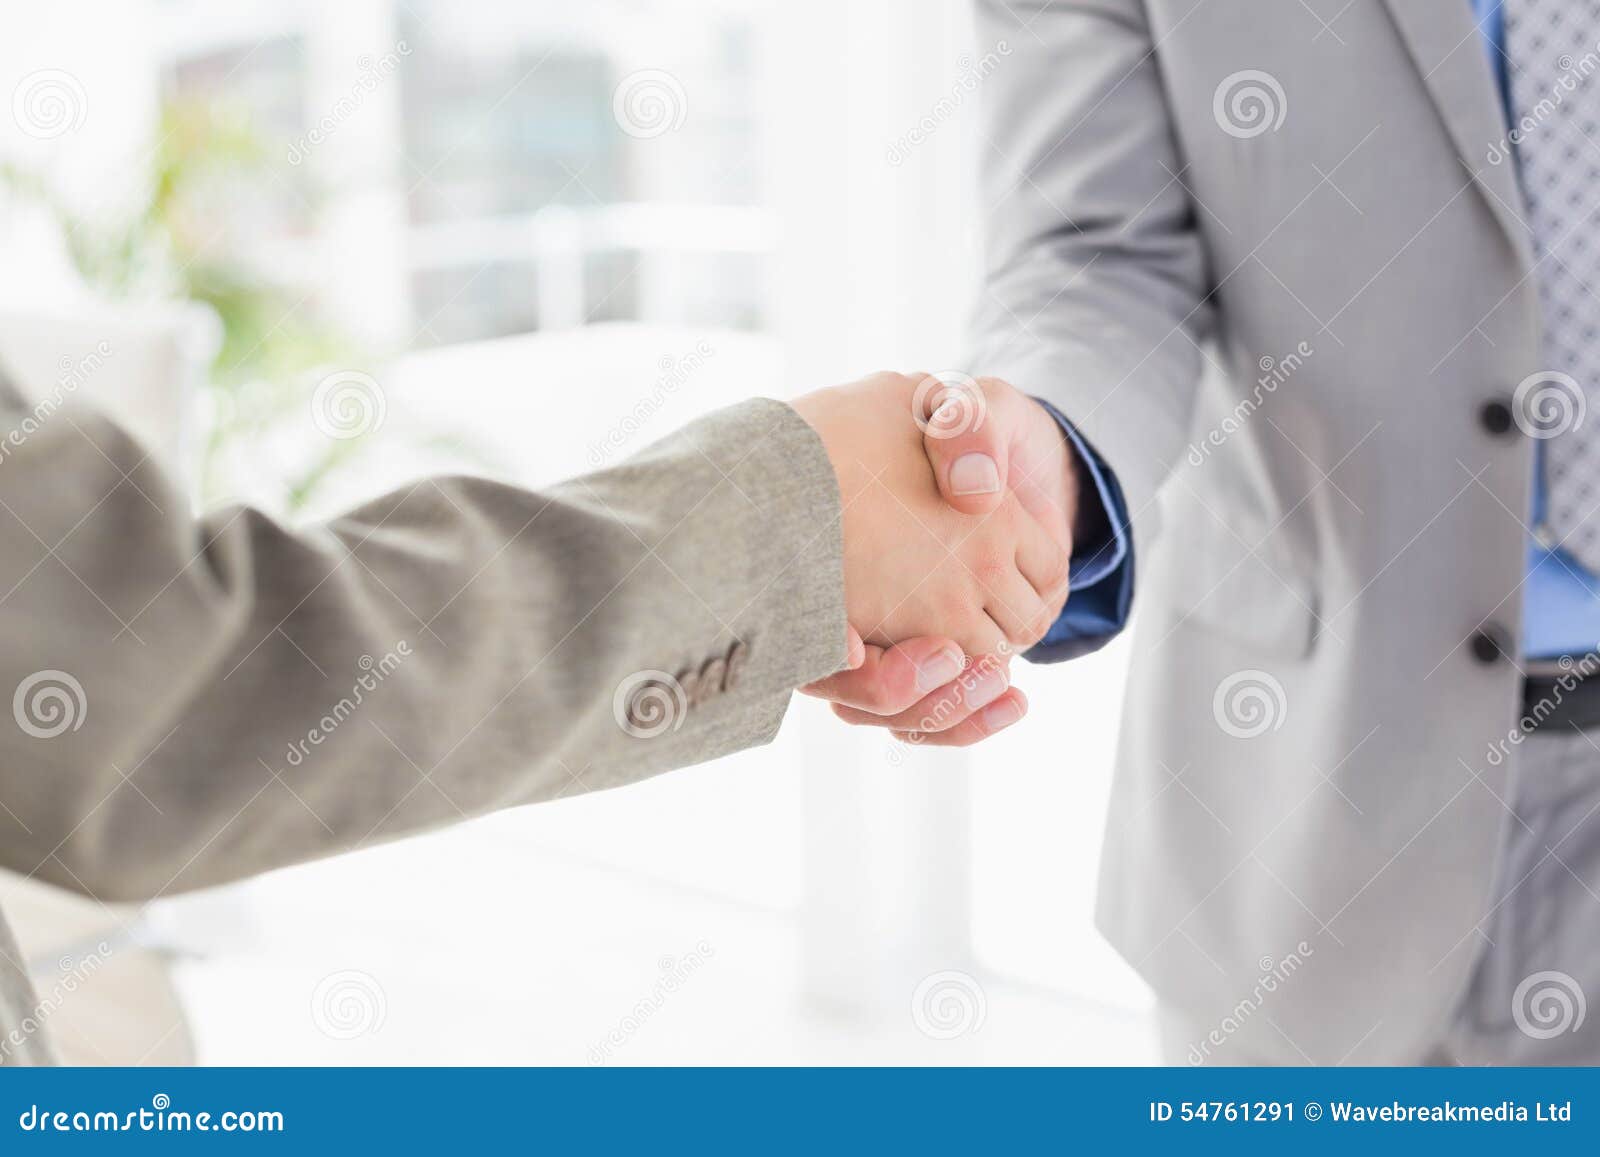 Businesswoman Shaking Hands with a Businessman Stock Image - Image of ...